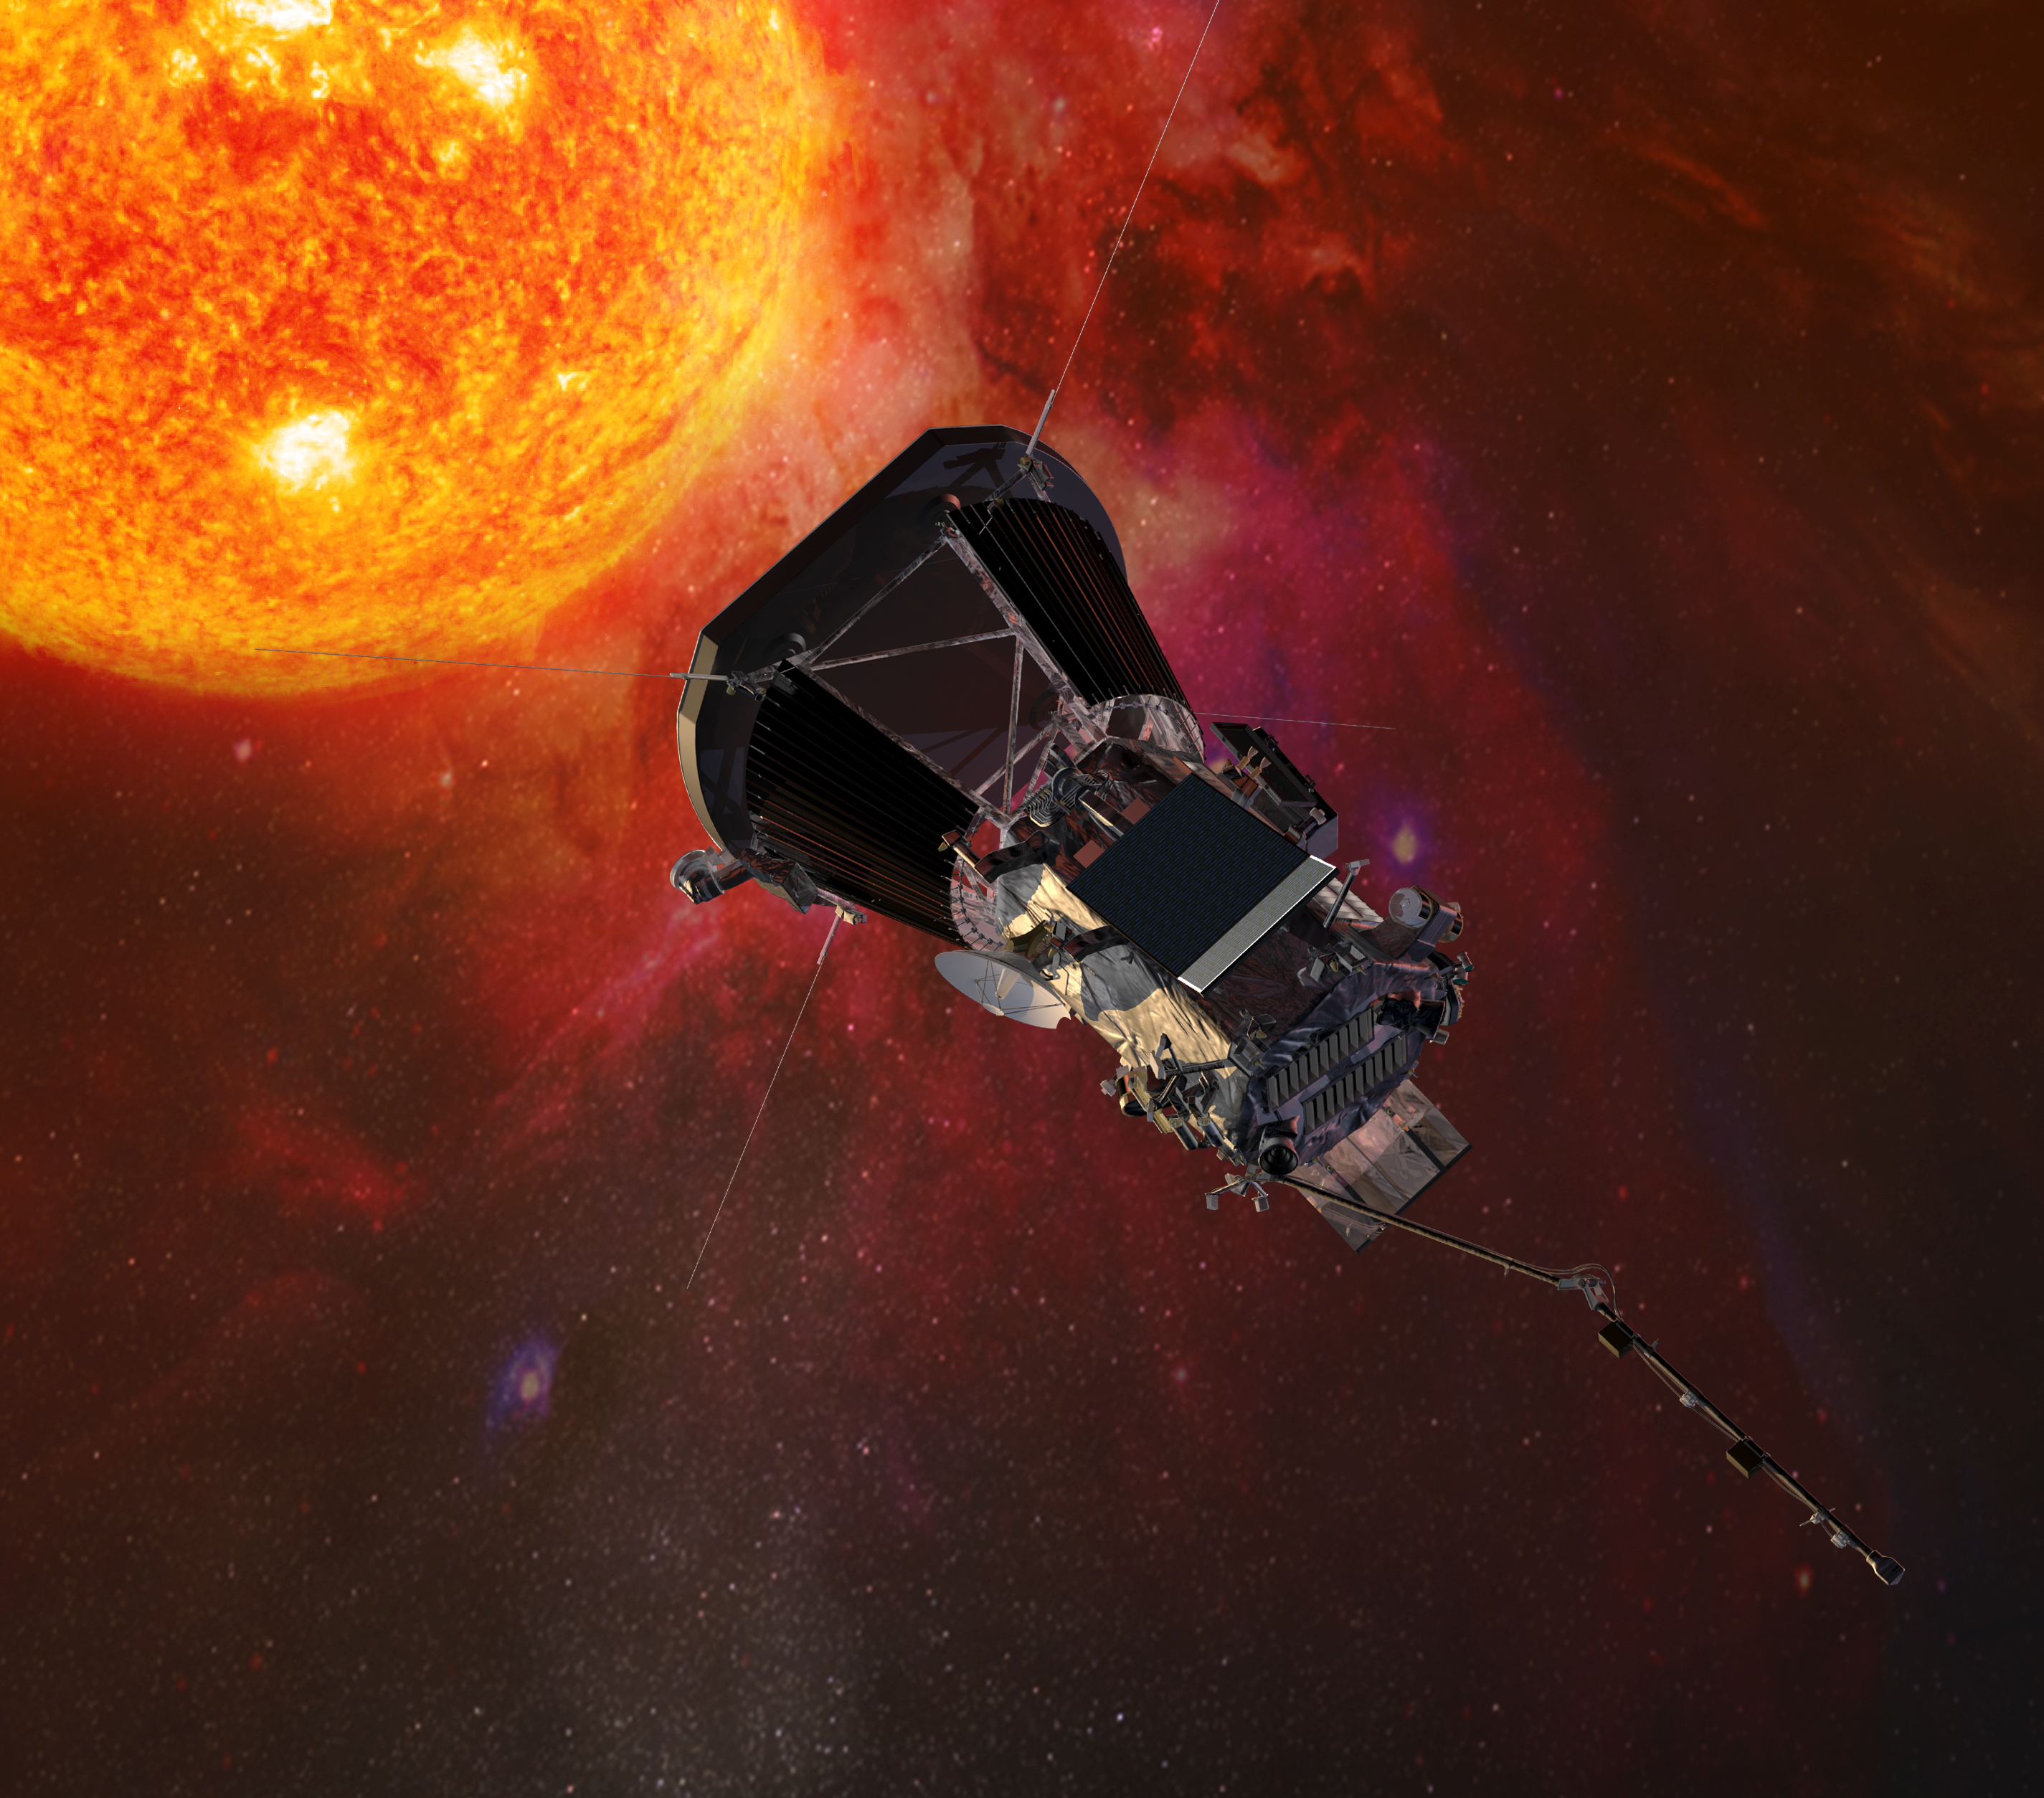 Illustration of the Parker Solar Probe spacecraft approaching the sun.